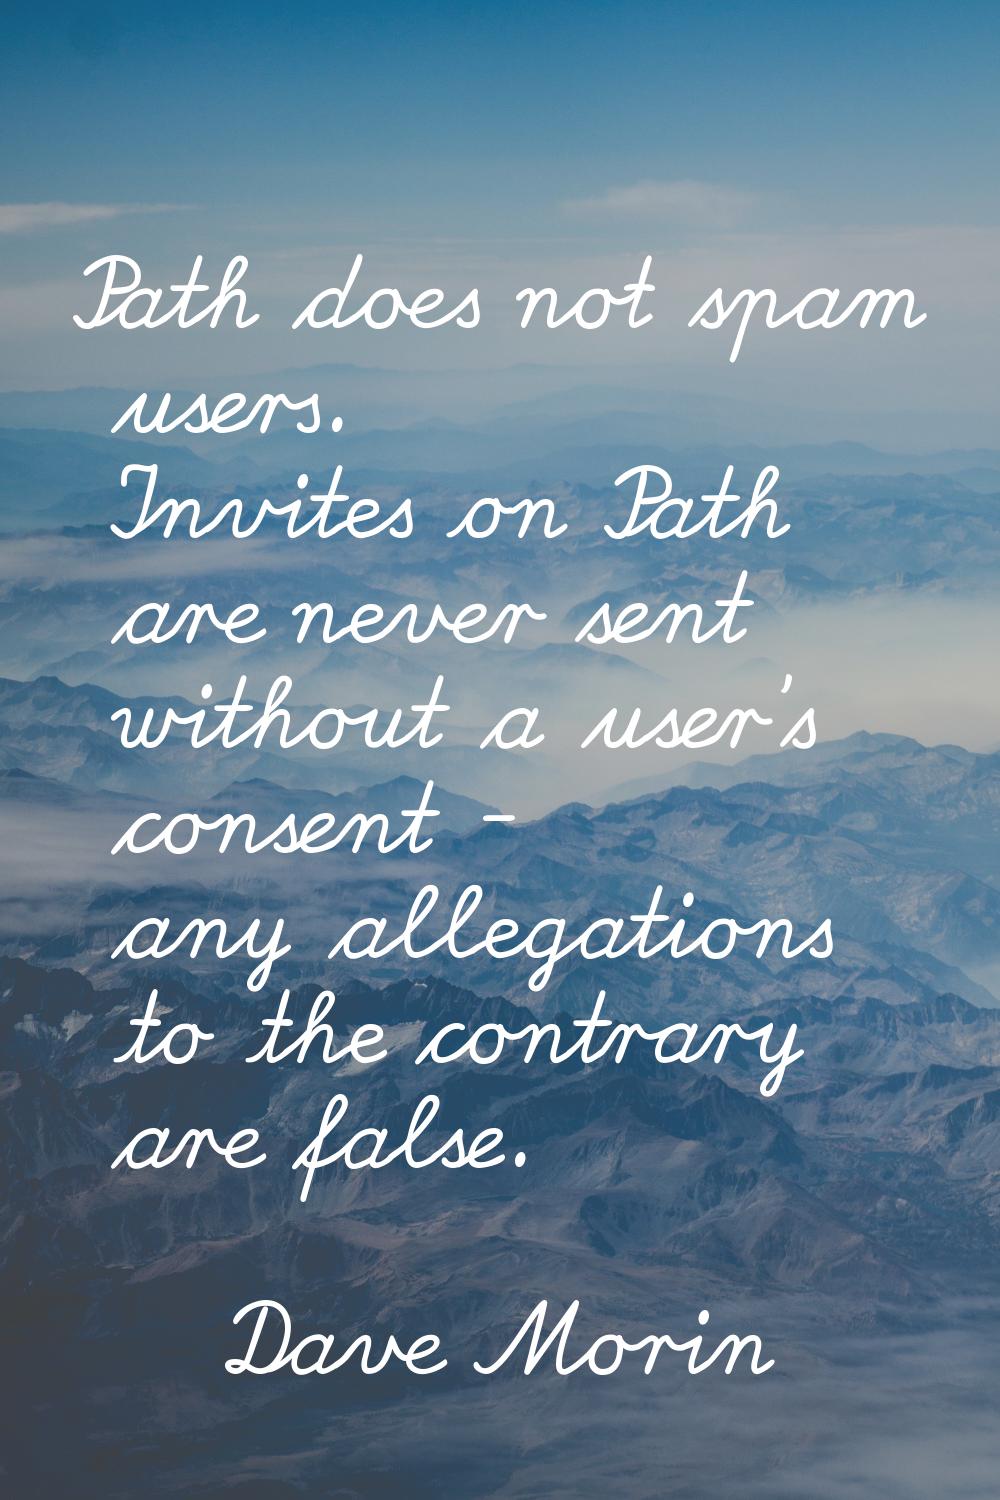 Path does not spam users. Invites on Path are never sent without a user's consent - any allegations